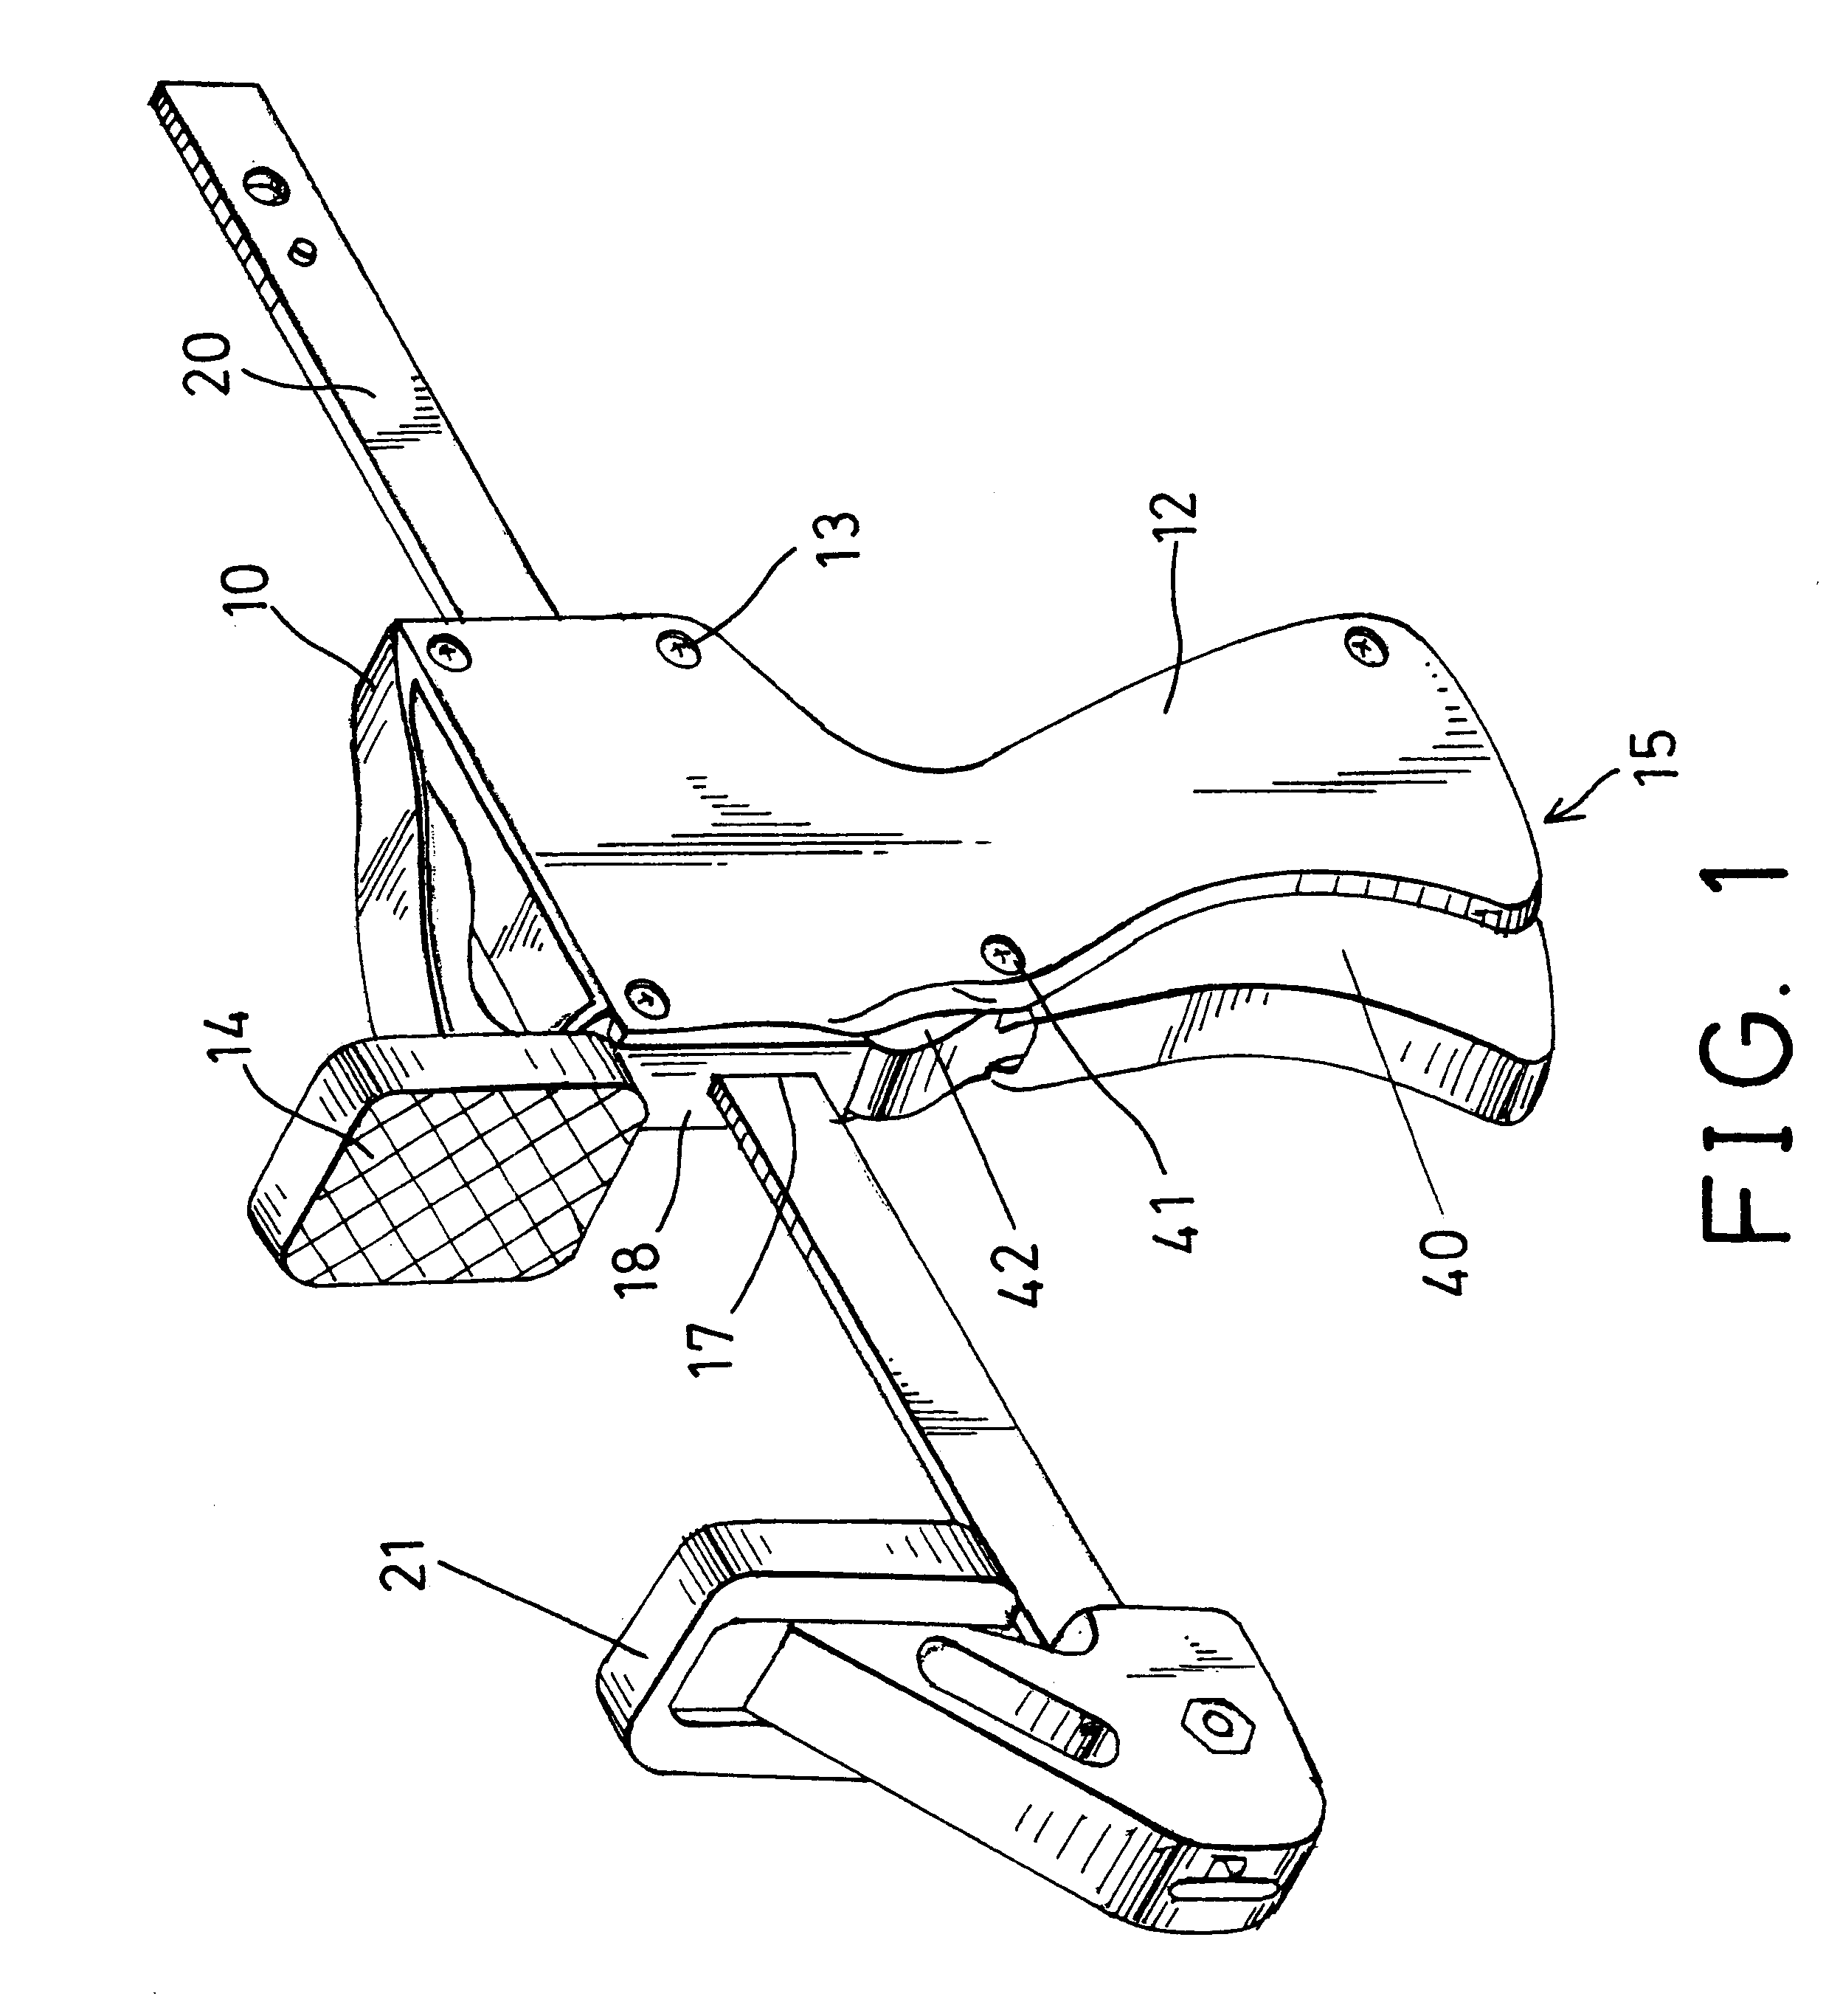 Clamping device having indirect driving mechanism